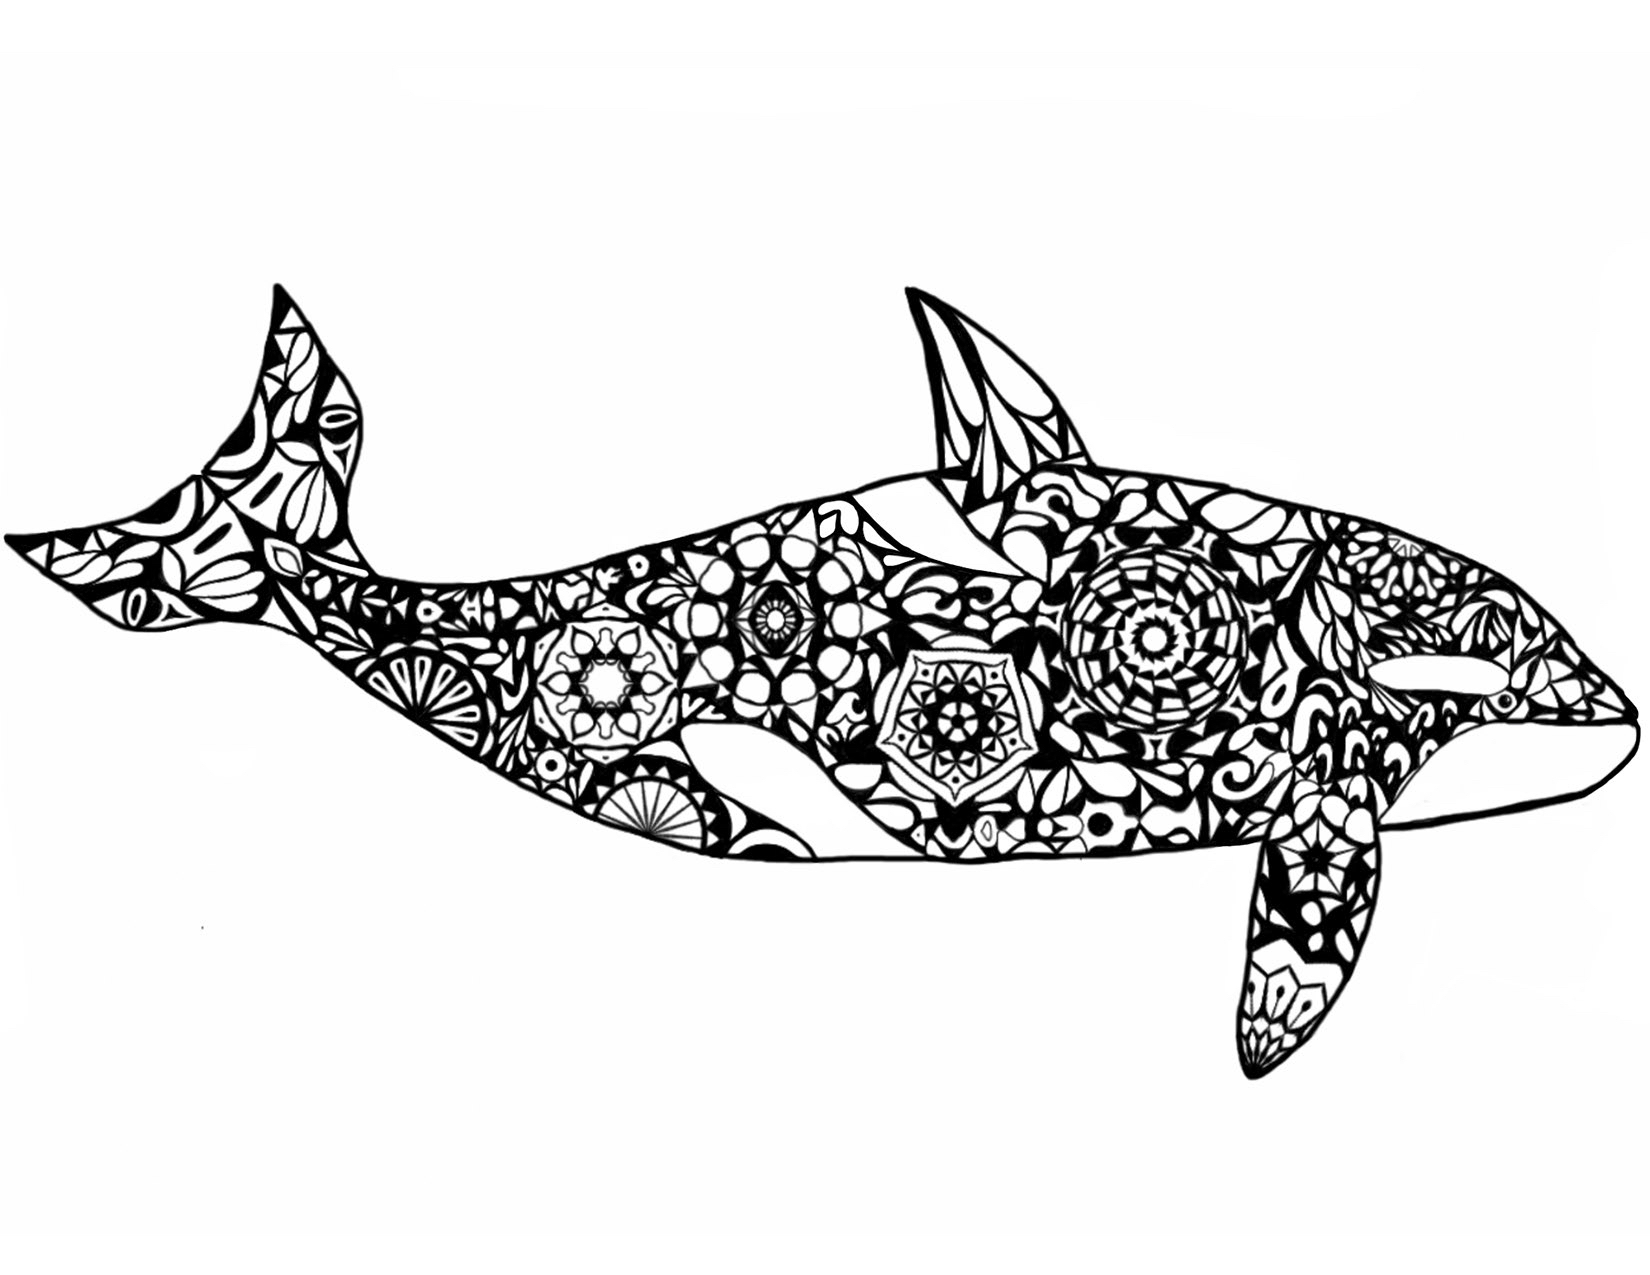 Get Realistic Orca Whale Coloring Page Gif - Image Analysis Example